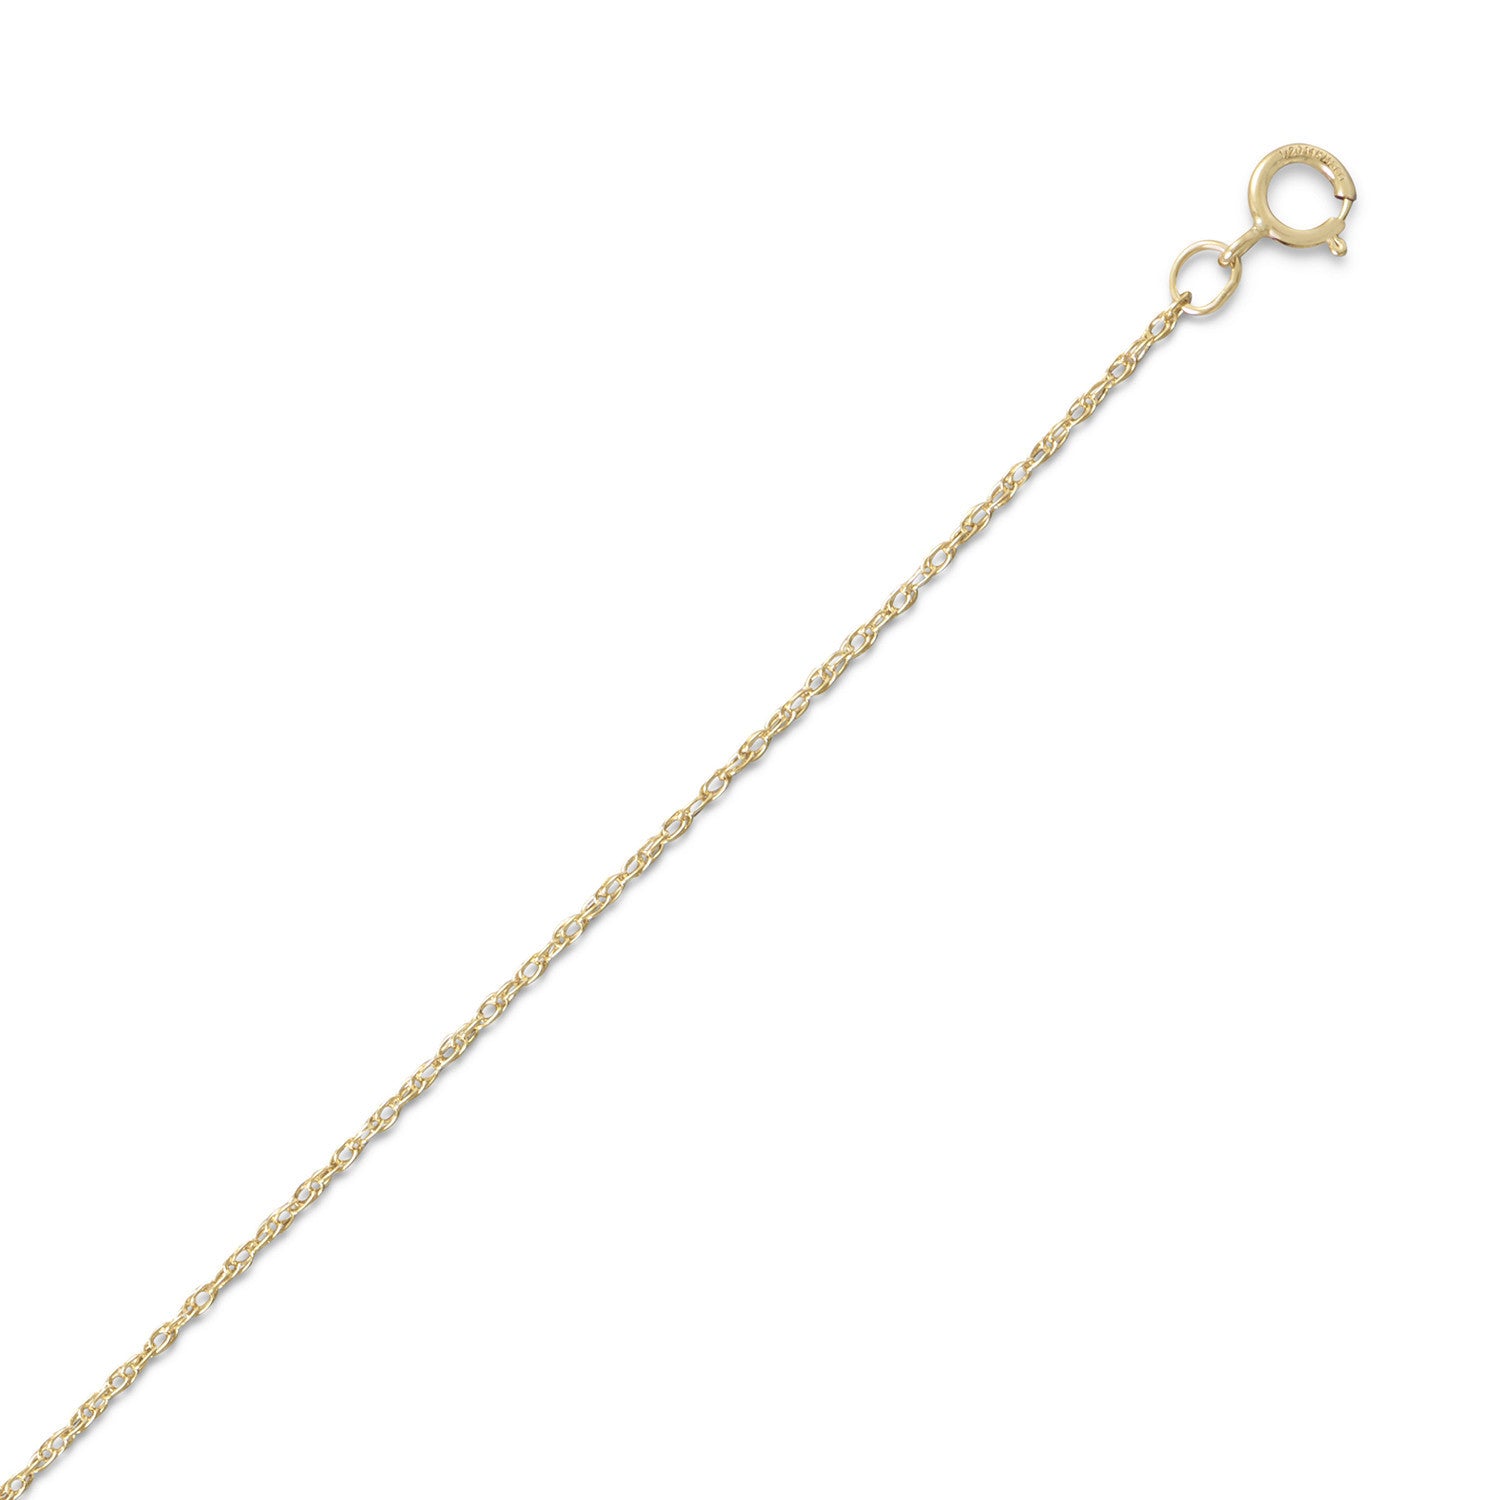 Gold Filled Rope Chain 20" (1mm) 14/20